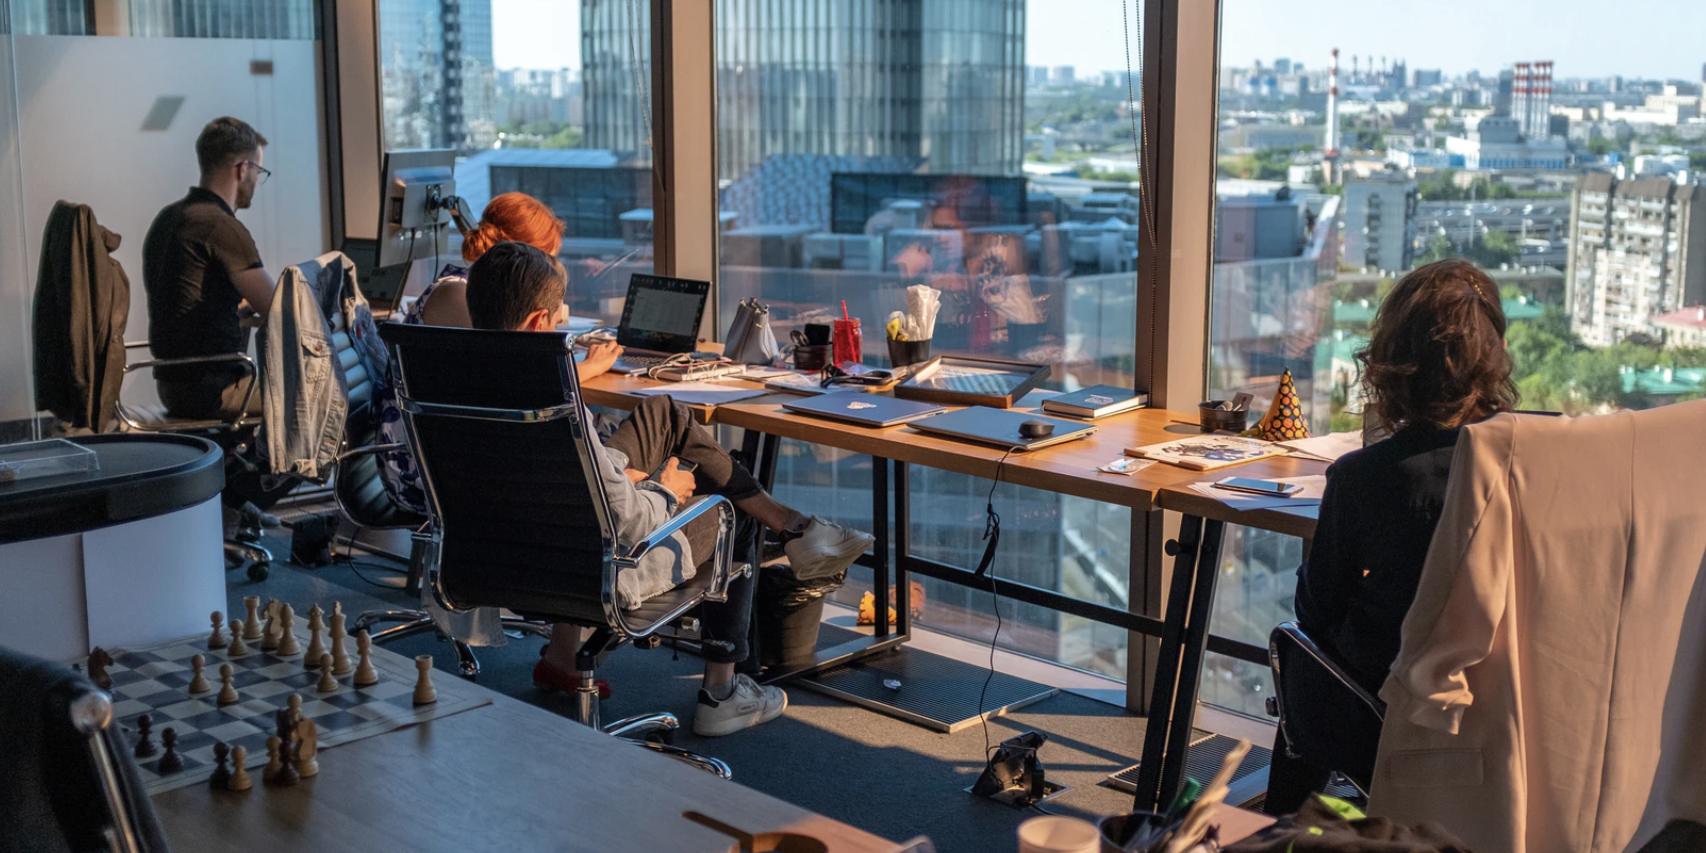 People working in front of computers with view of the city from office